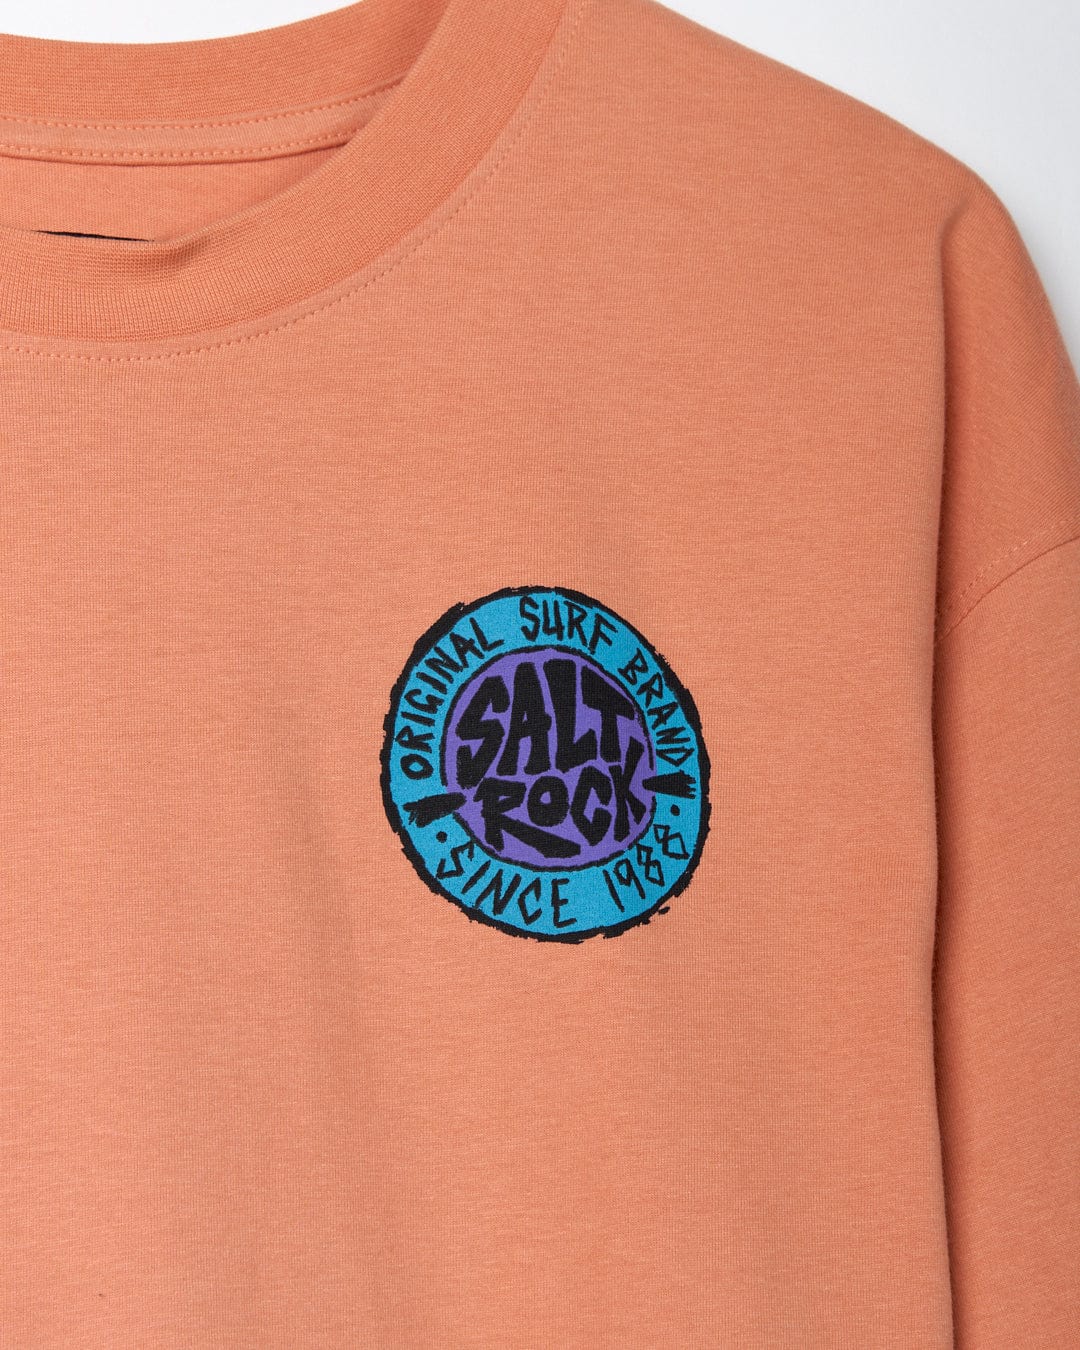 Close-up of an oversized peach-colored Saltrock t-shirt with a circular "SR Originals" logo patch on the chest.